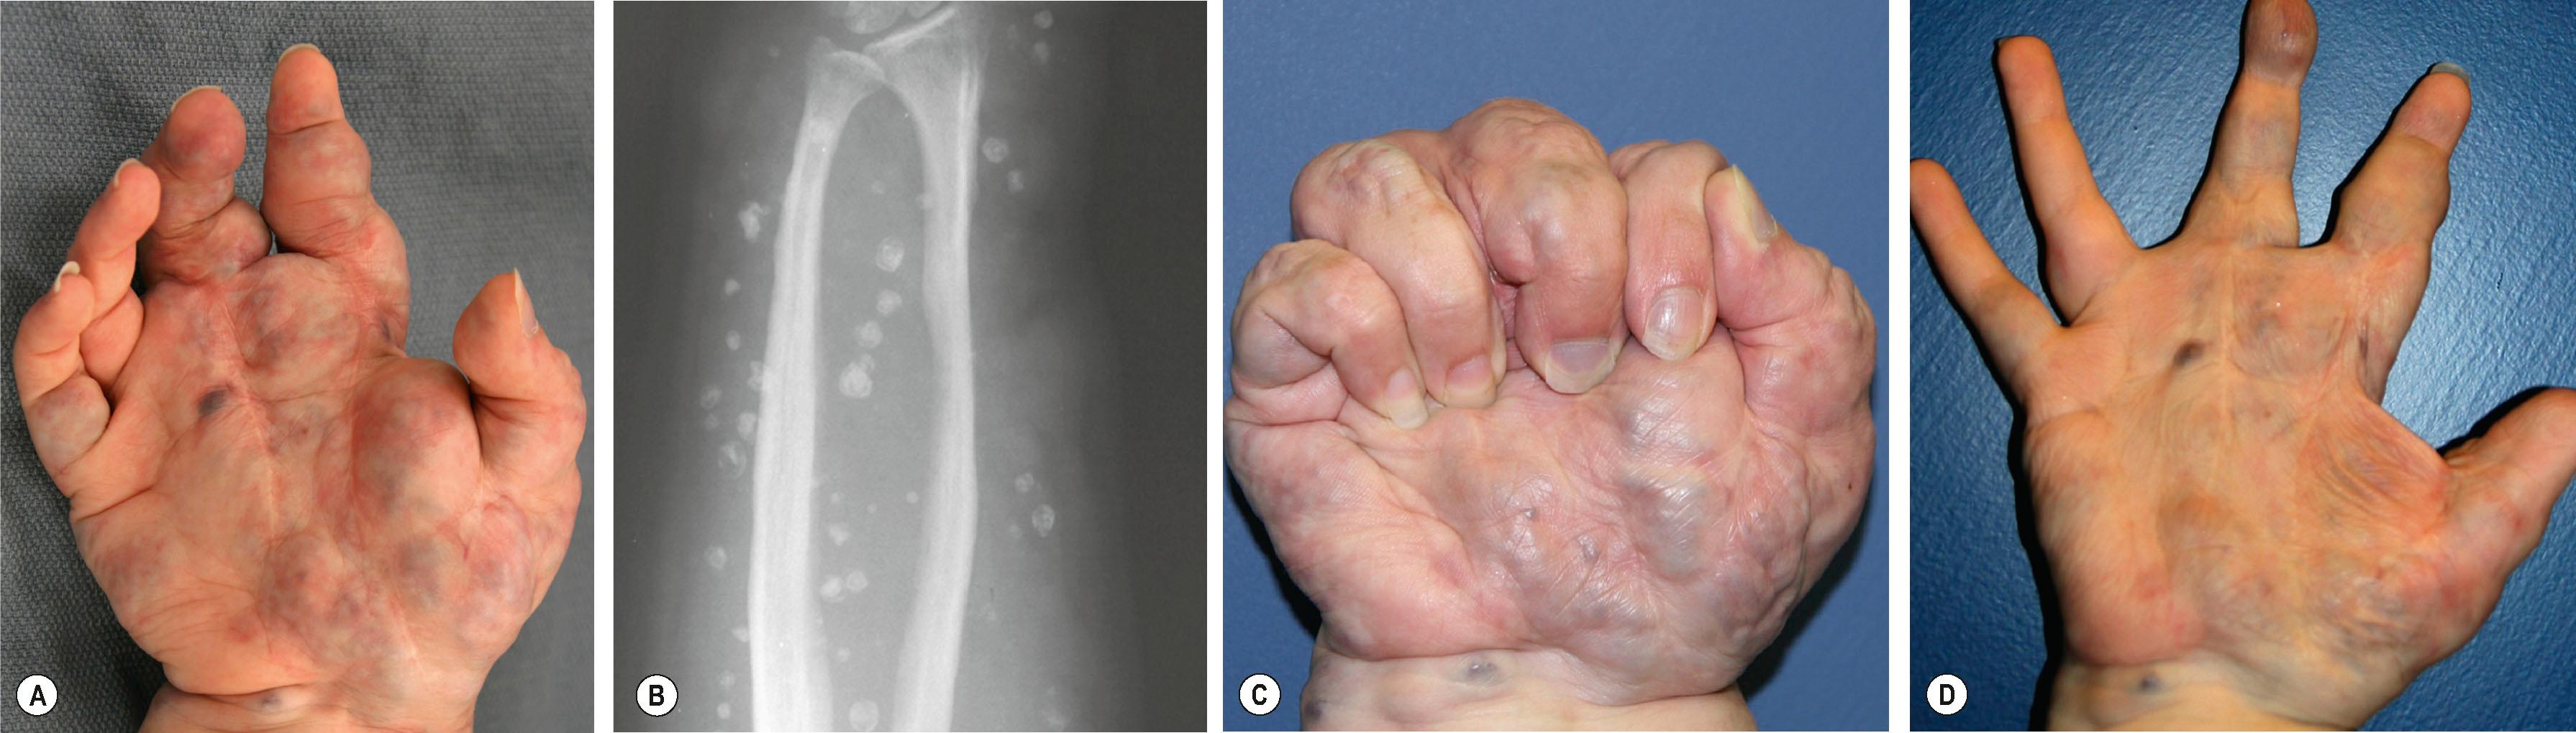 Figure 37.8, Diffuse VM of the hand and forearm. (A) In a dependent position, the hand becomes engorged; bulk and weight become a functional impediment. (B) Calcified phleboliths are often present. (C) Functional motion is impaired only by local bulk of the malformation. (D) After elevation there is no pain, fullness or congestion. This patient is on long-term anticoagulation due to an extensive VM involving the entire extremity and hemi-thorax with a large, stagnant venous collecting system in the axilla.